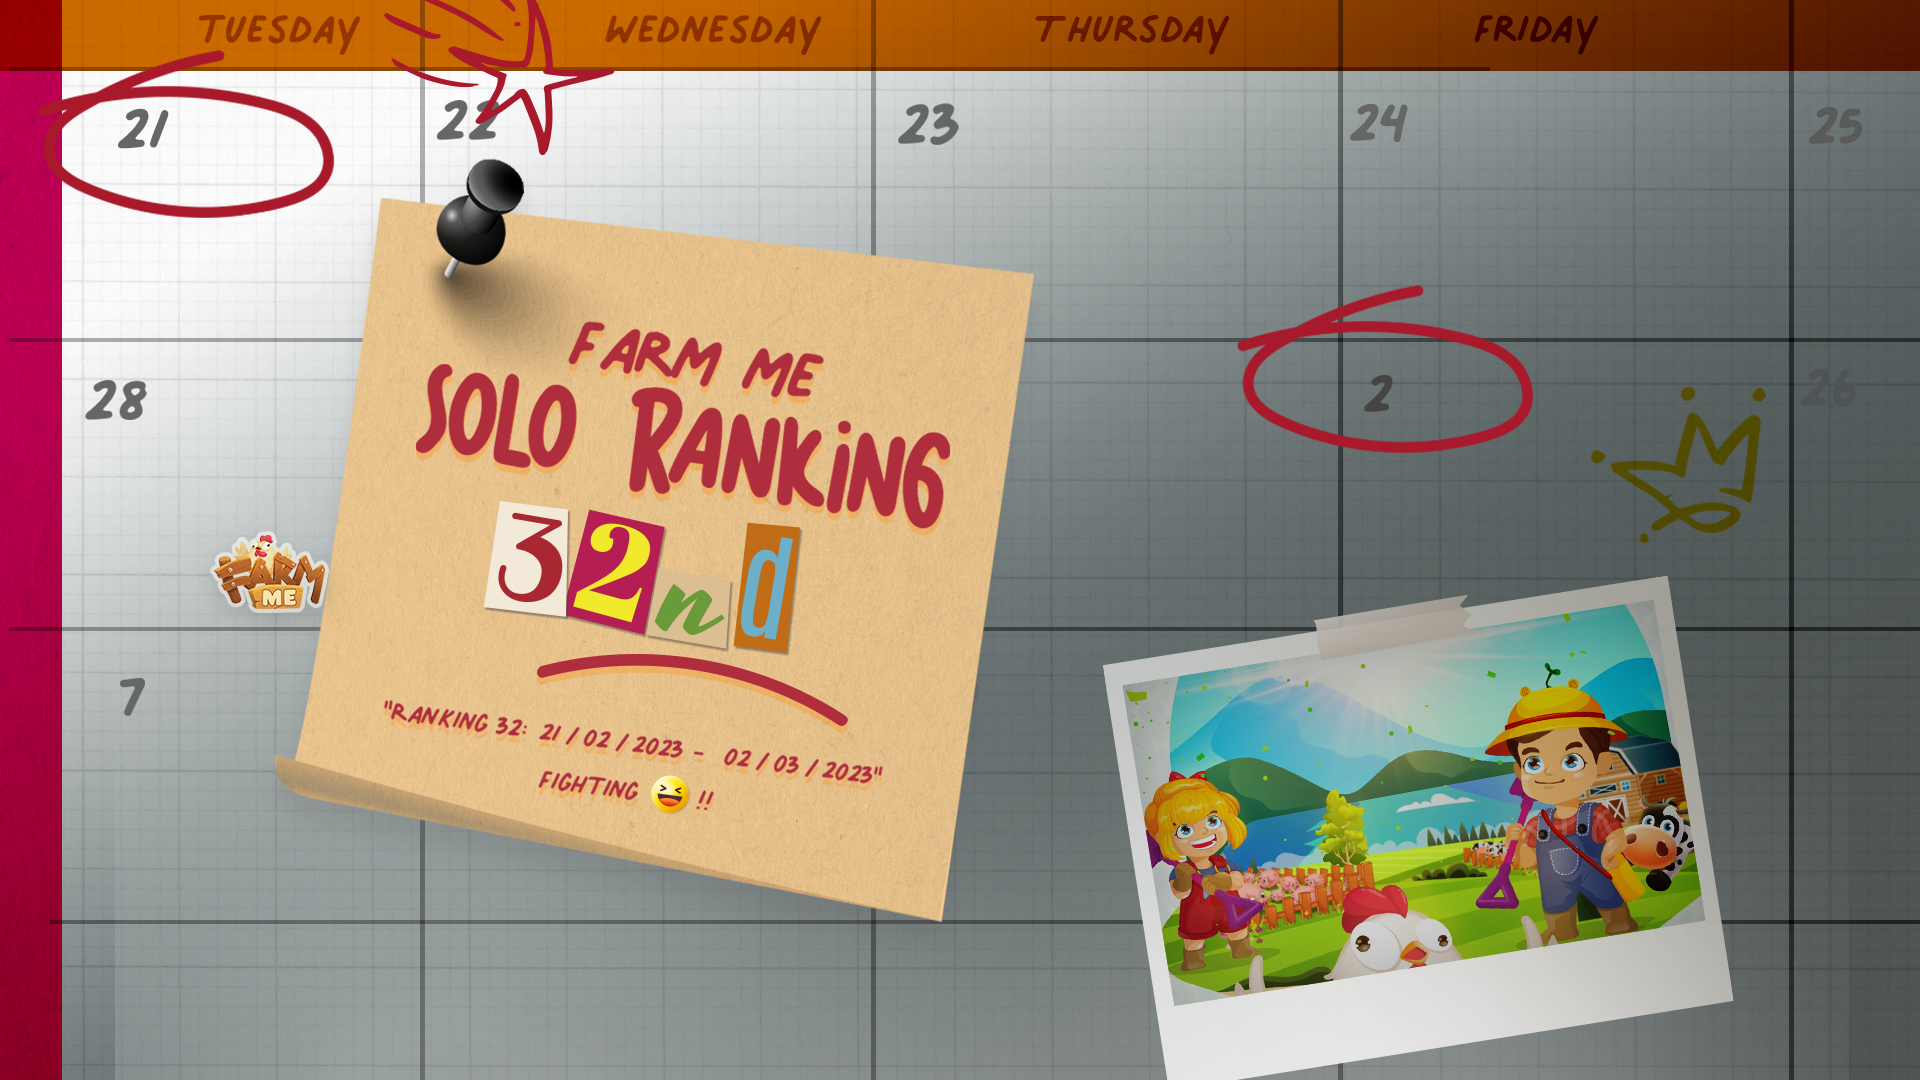 SOLO RANKING - Detailed information of 32th Solo Ranking